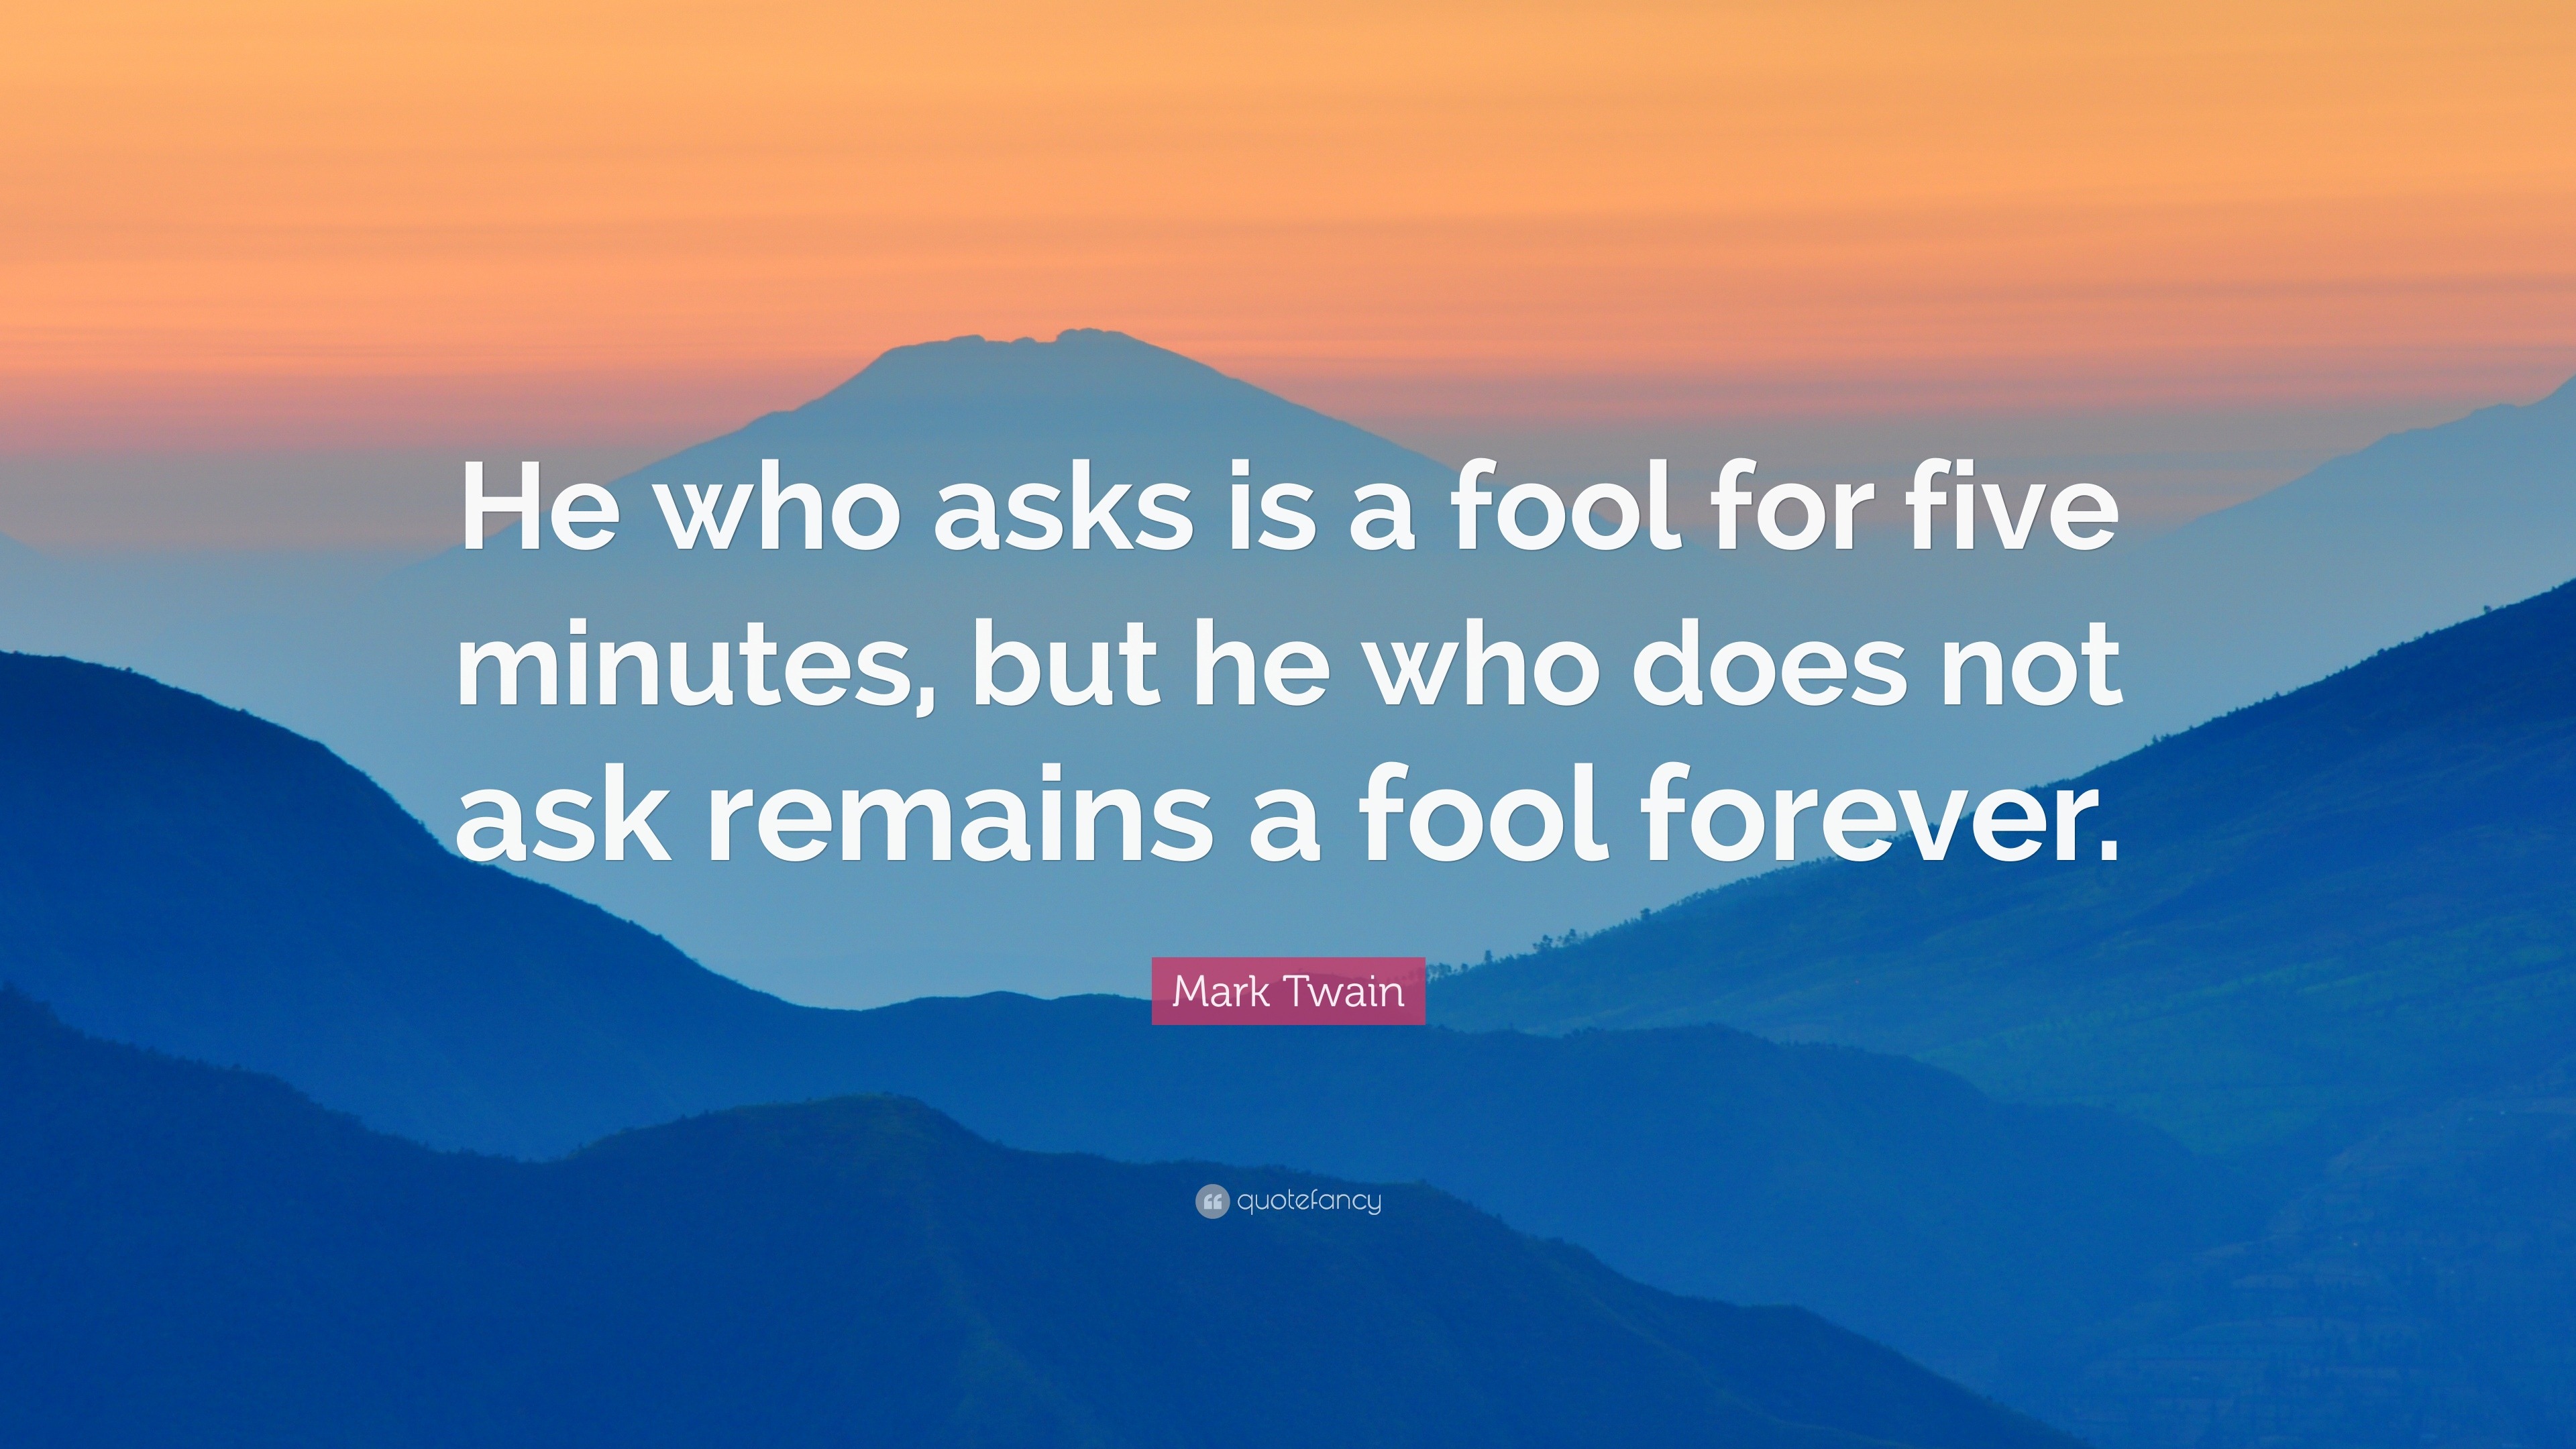 Mark Twain Quote: "He who asks is a fool for five minutes ...